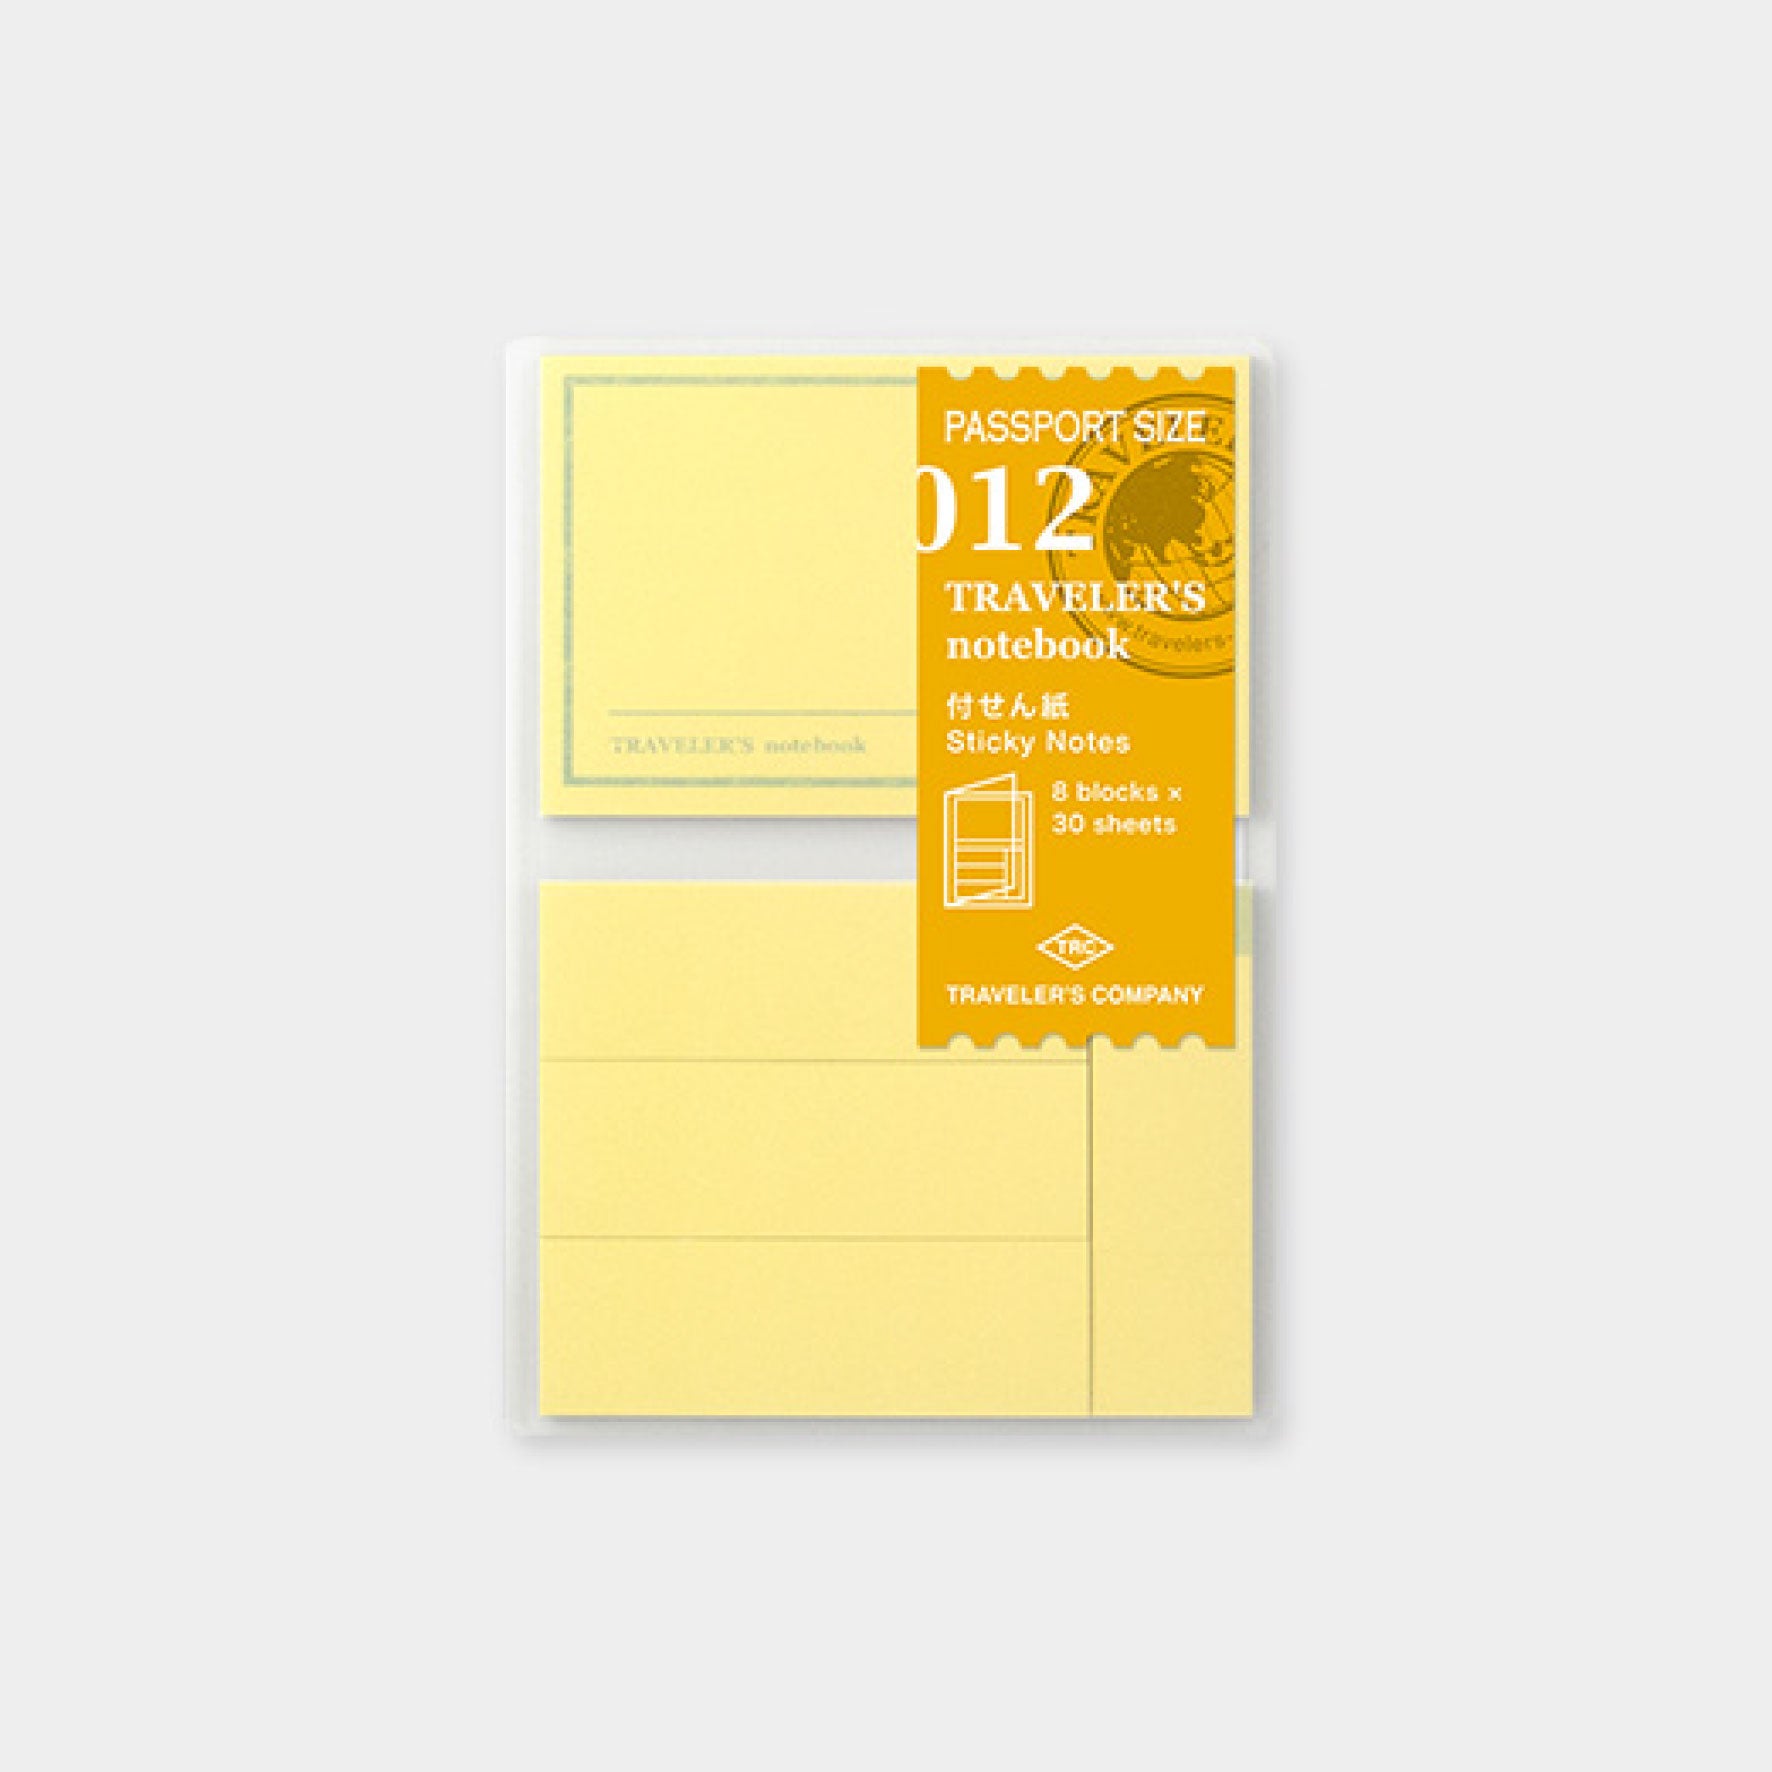 Traveler's Company - Inserts - Passport - 012 Sticky Notes <Outgoing>